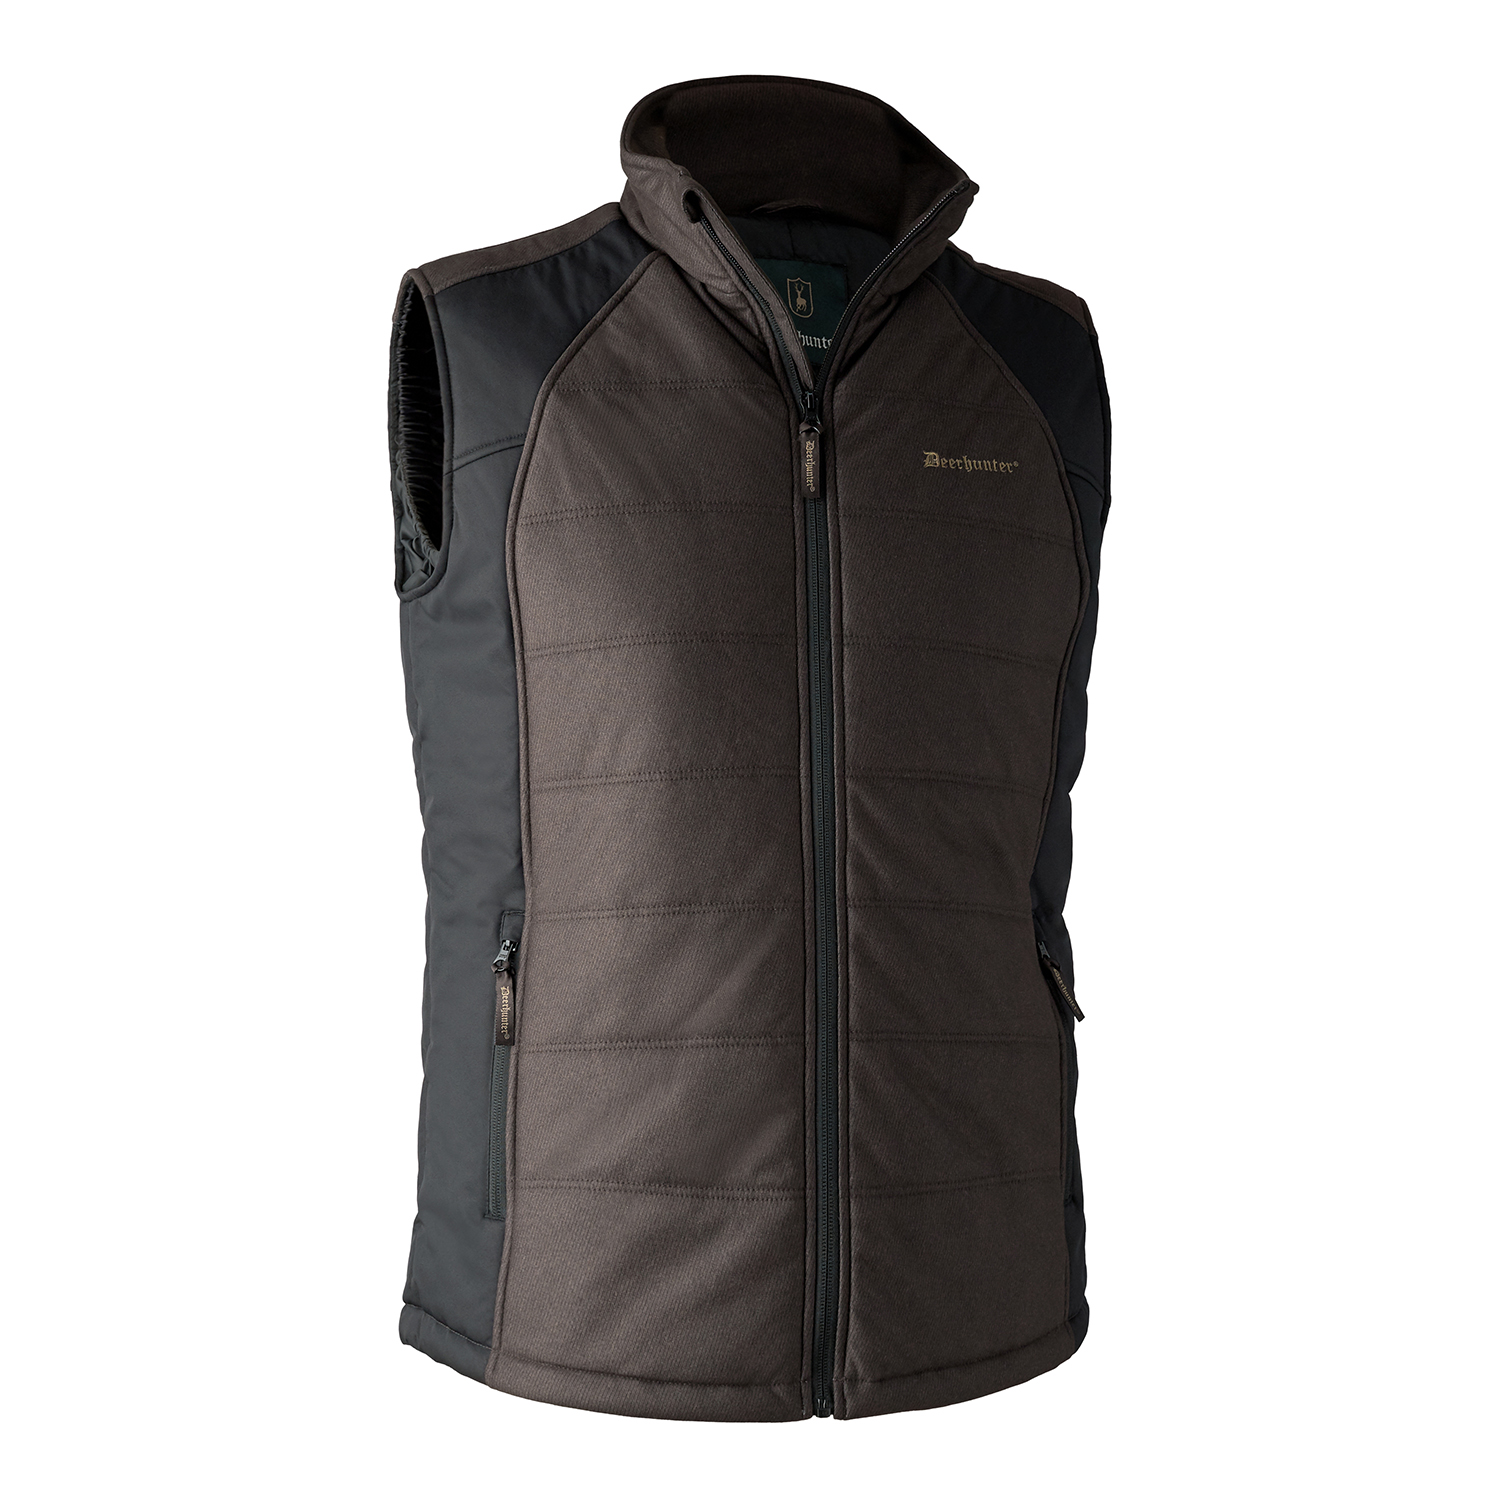 Moss Padded Vest - Brown Leaf - 2XL thumbnail